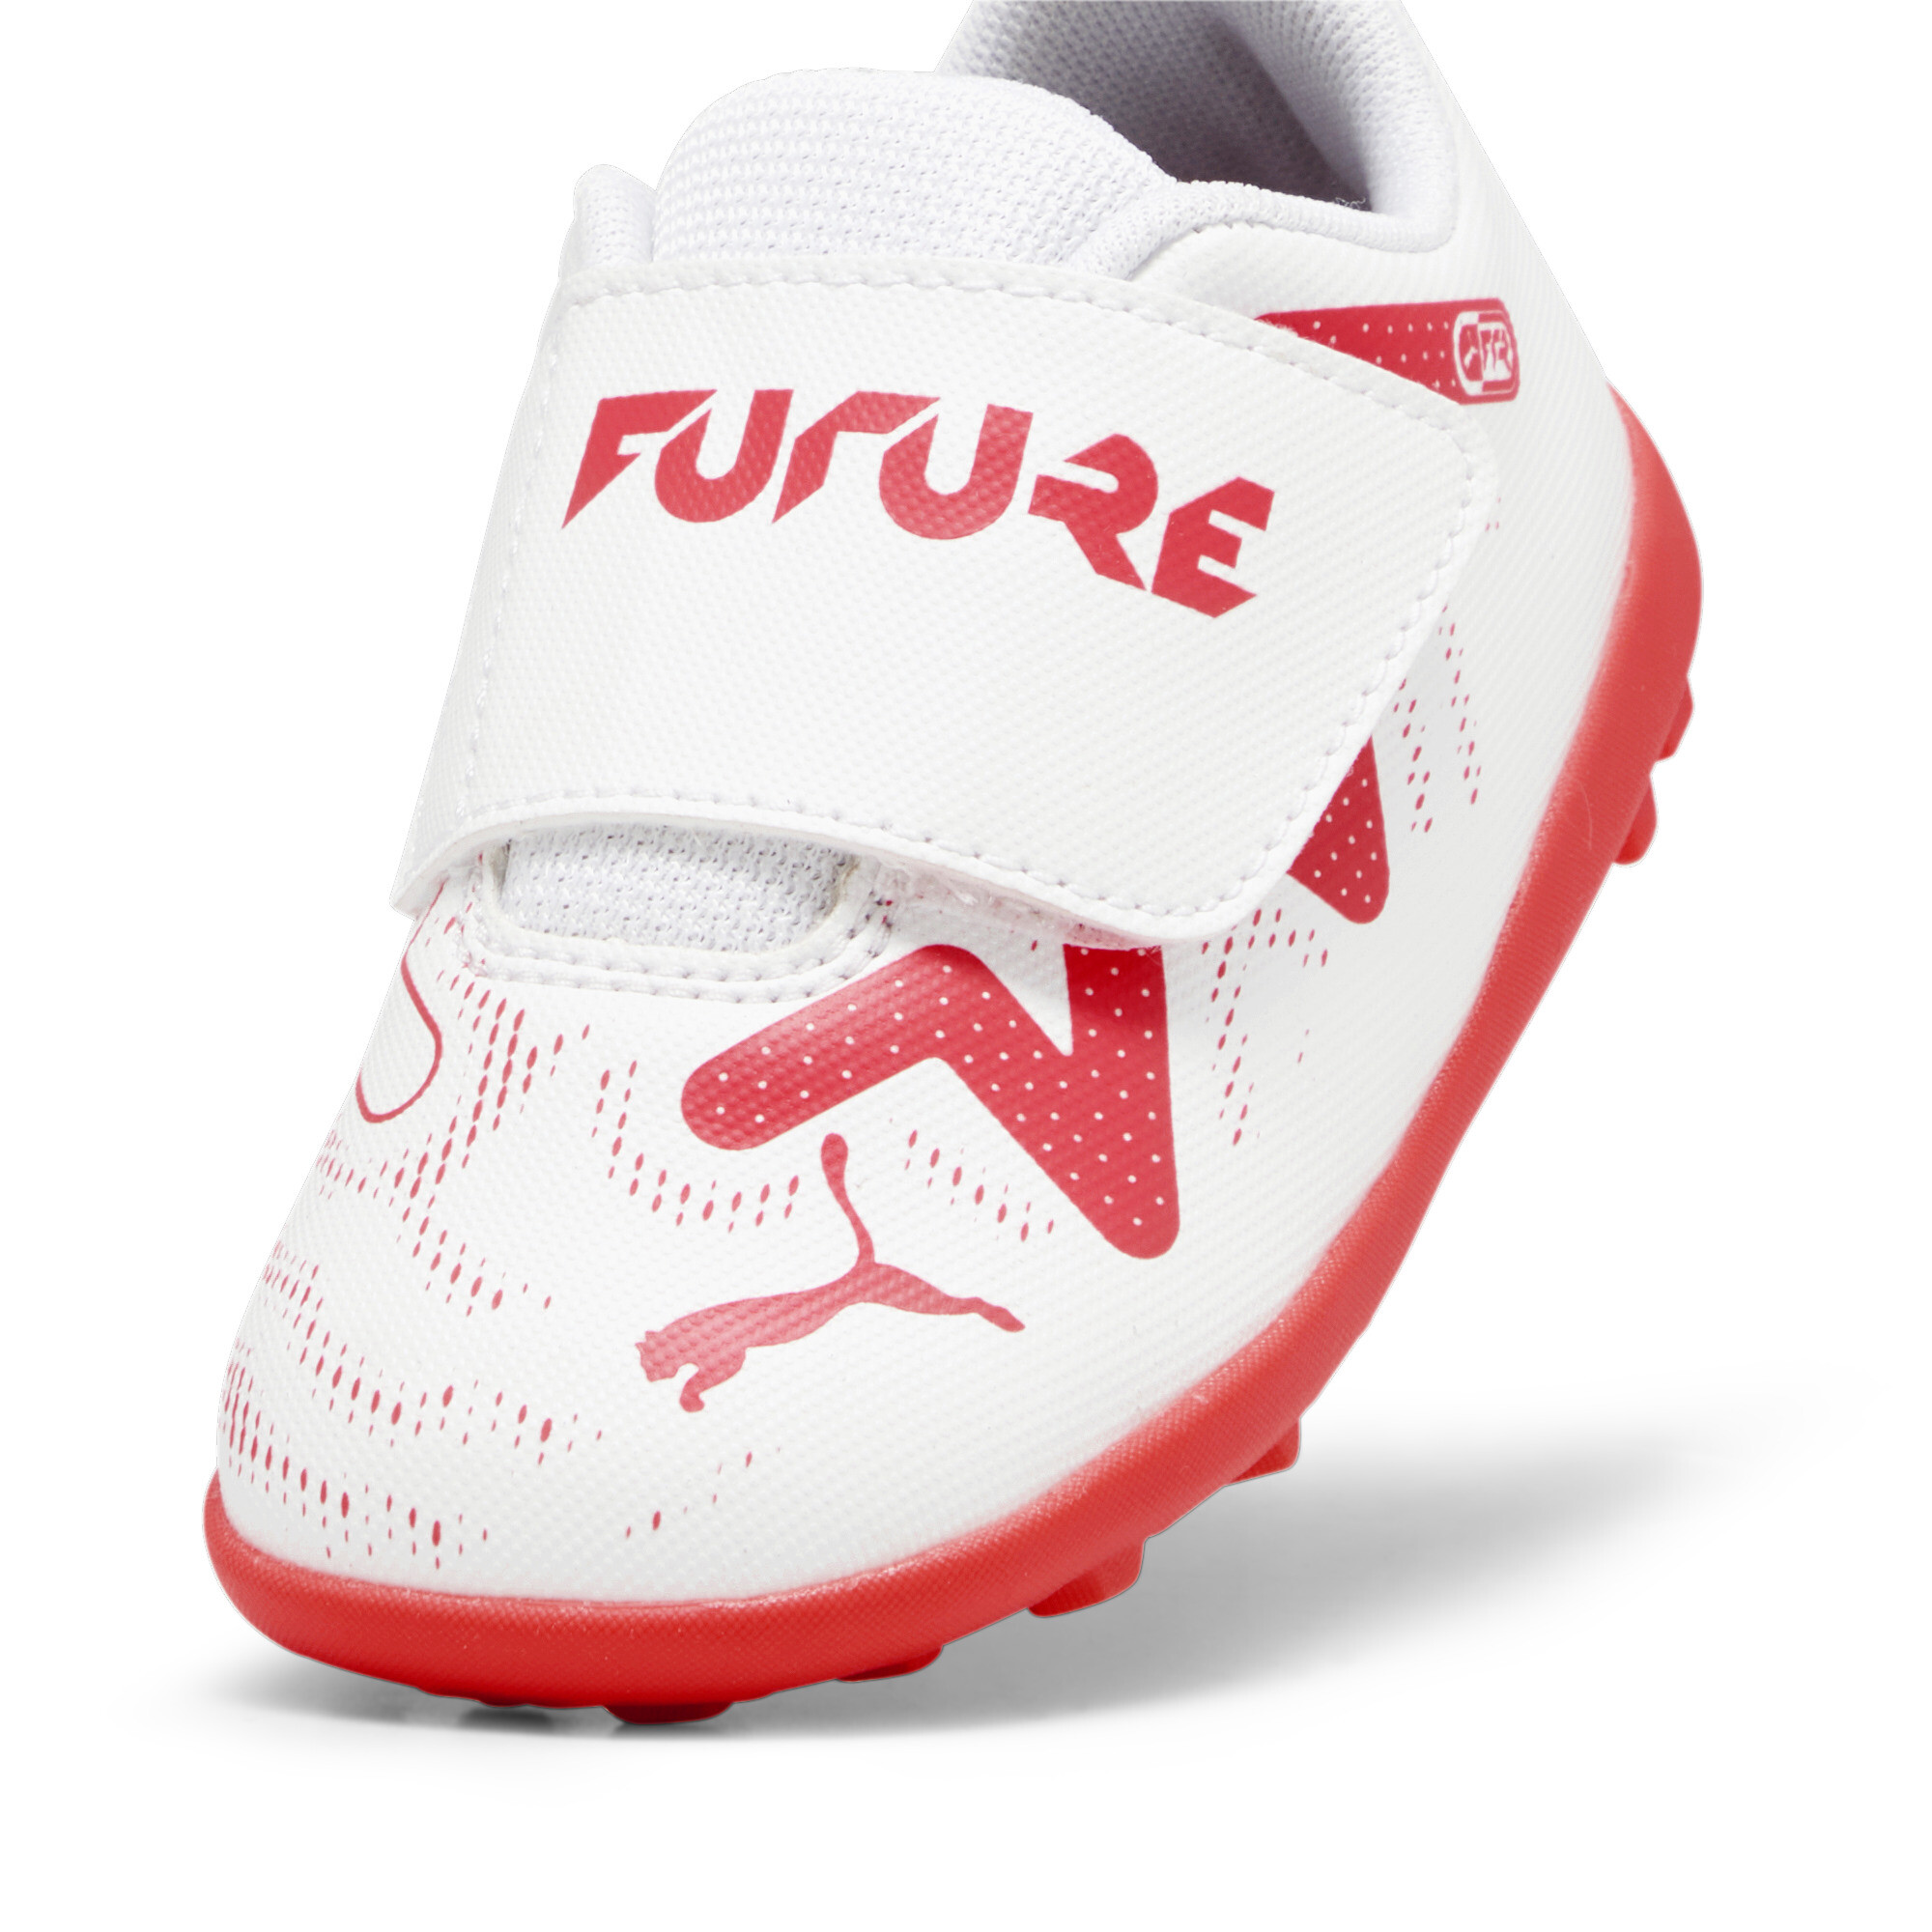 Kids' PUMA FUTURE PLAY TT Toddlers' Football Boots In White, Size EU 25